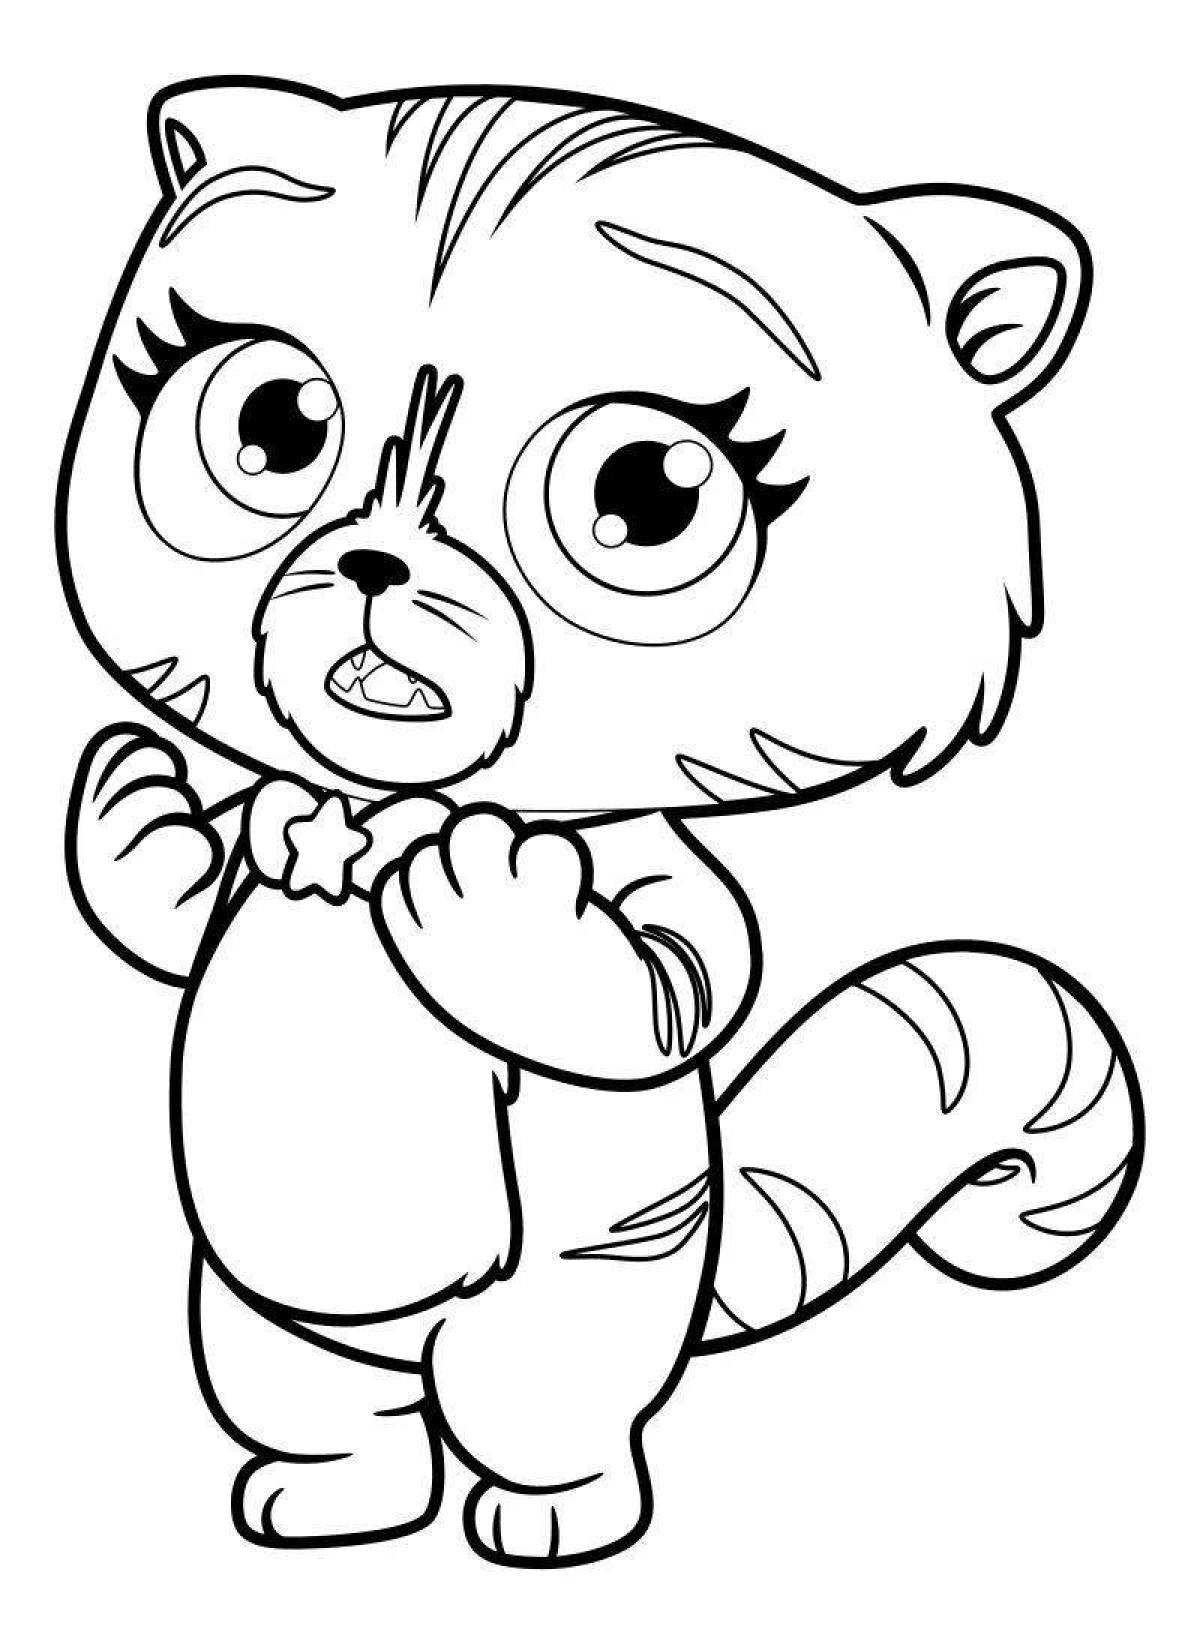 Cute cute kittens coloring page